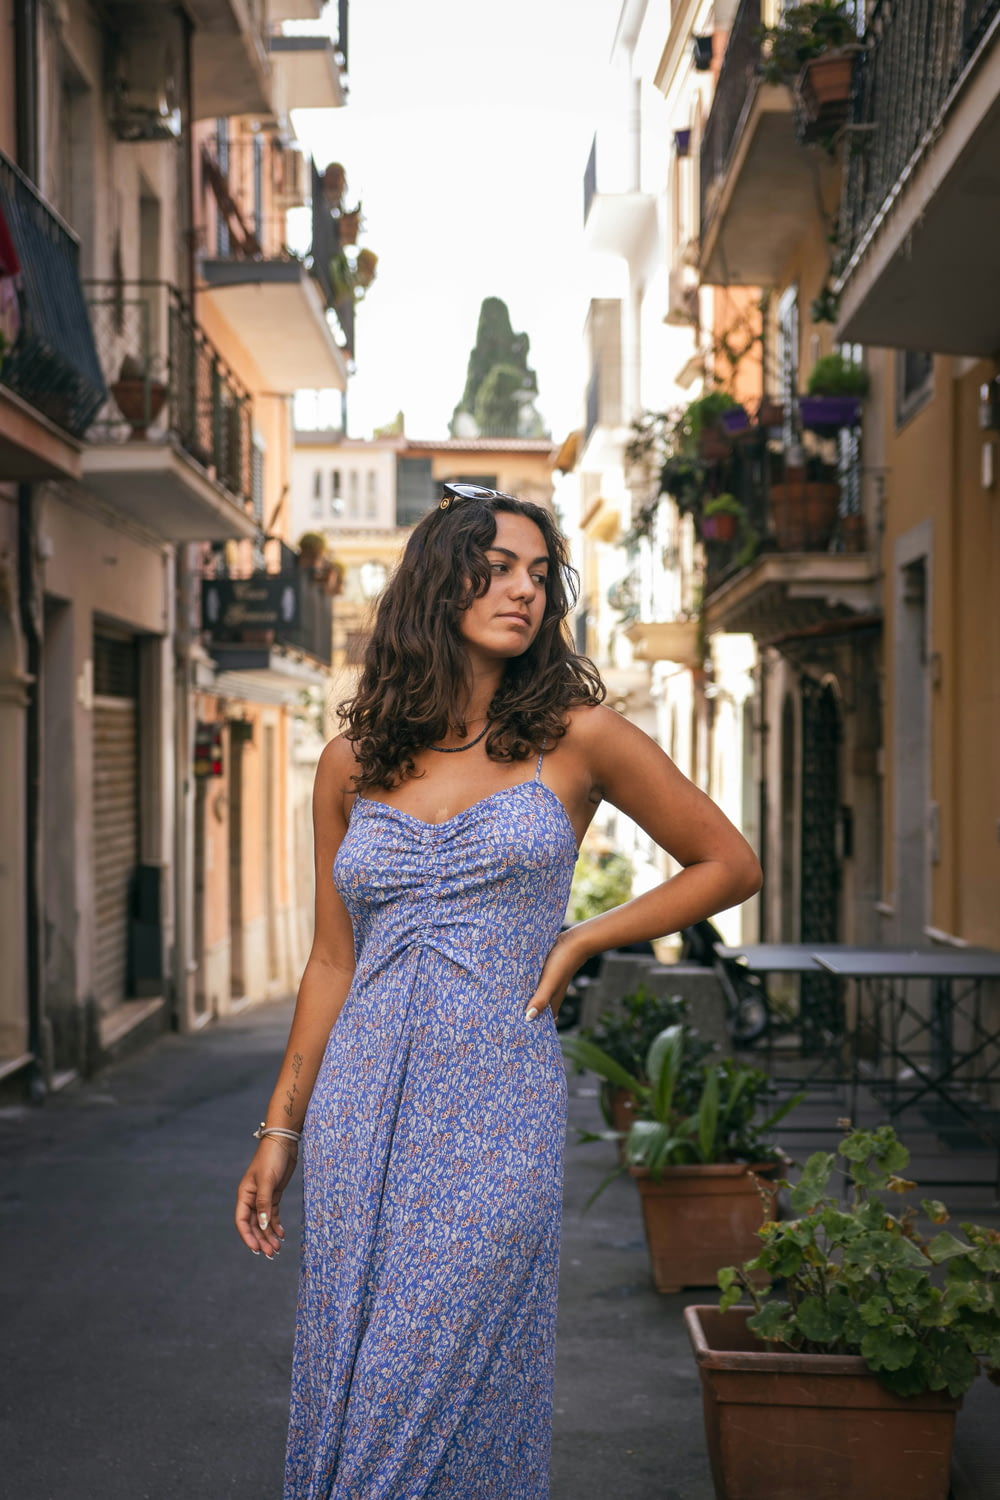 a woman in a blue dress standing on a street